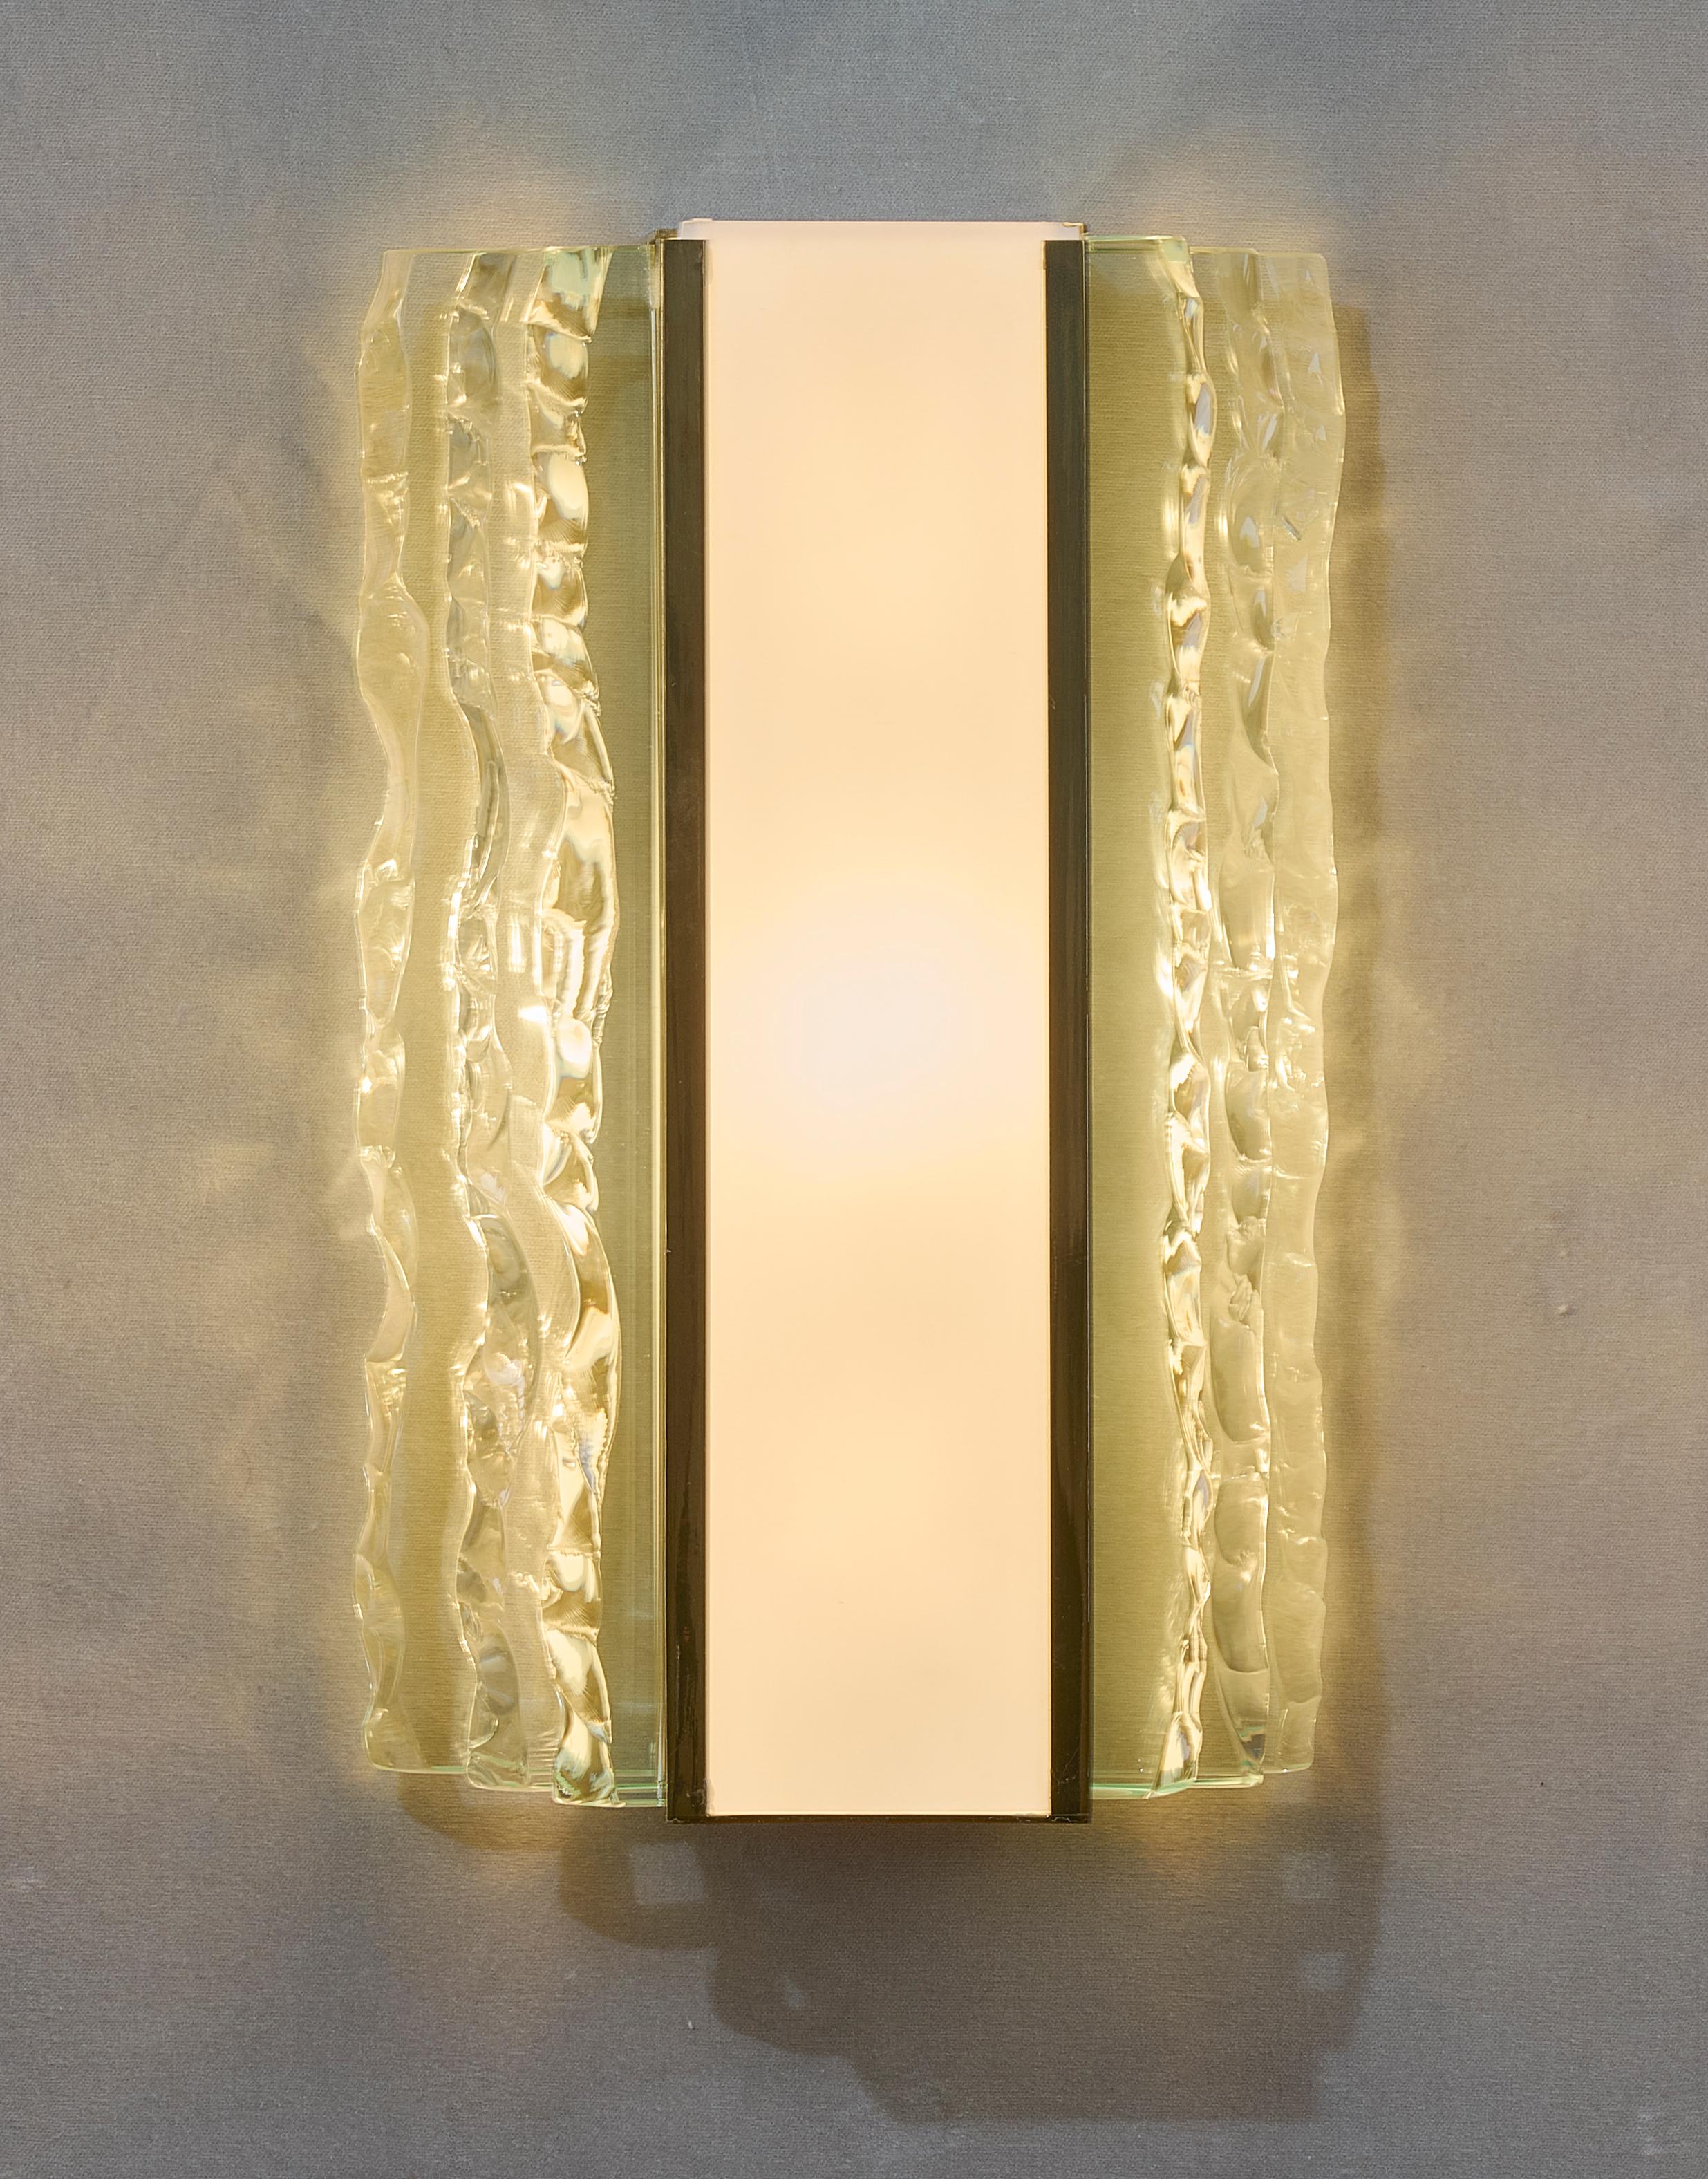 Max Ingrand for Fontana Arte: Pair of Cut Crystal and Brass Sconces, Italy 1954 For Sale 1